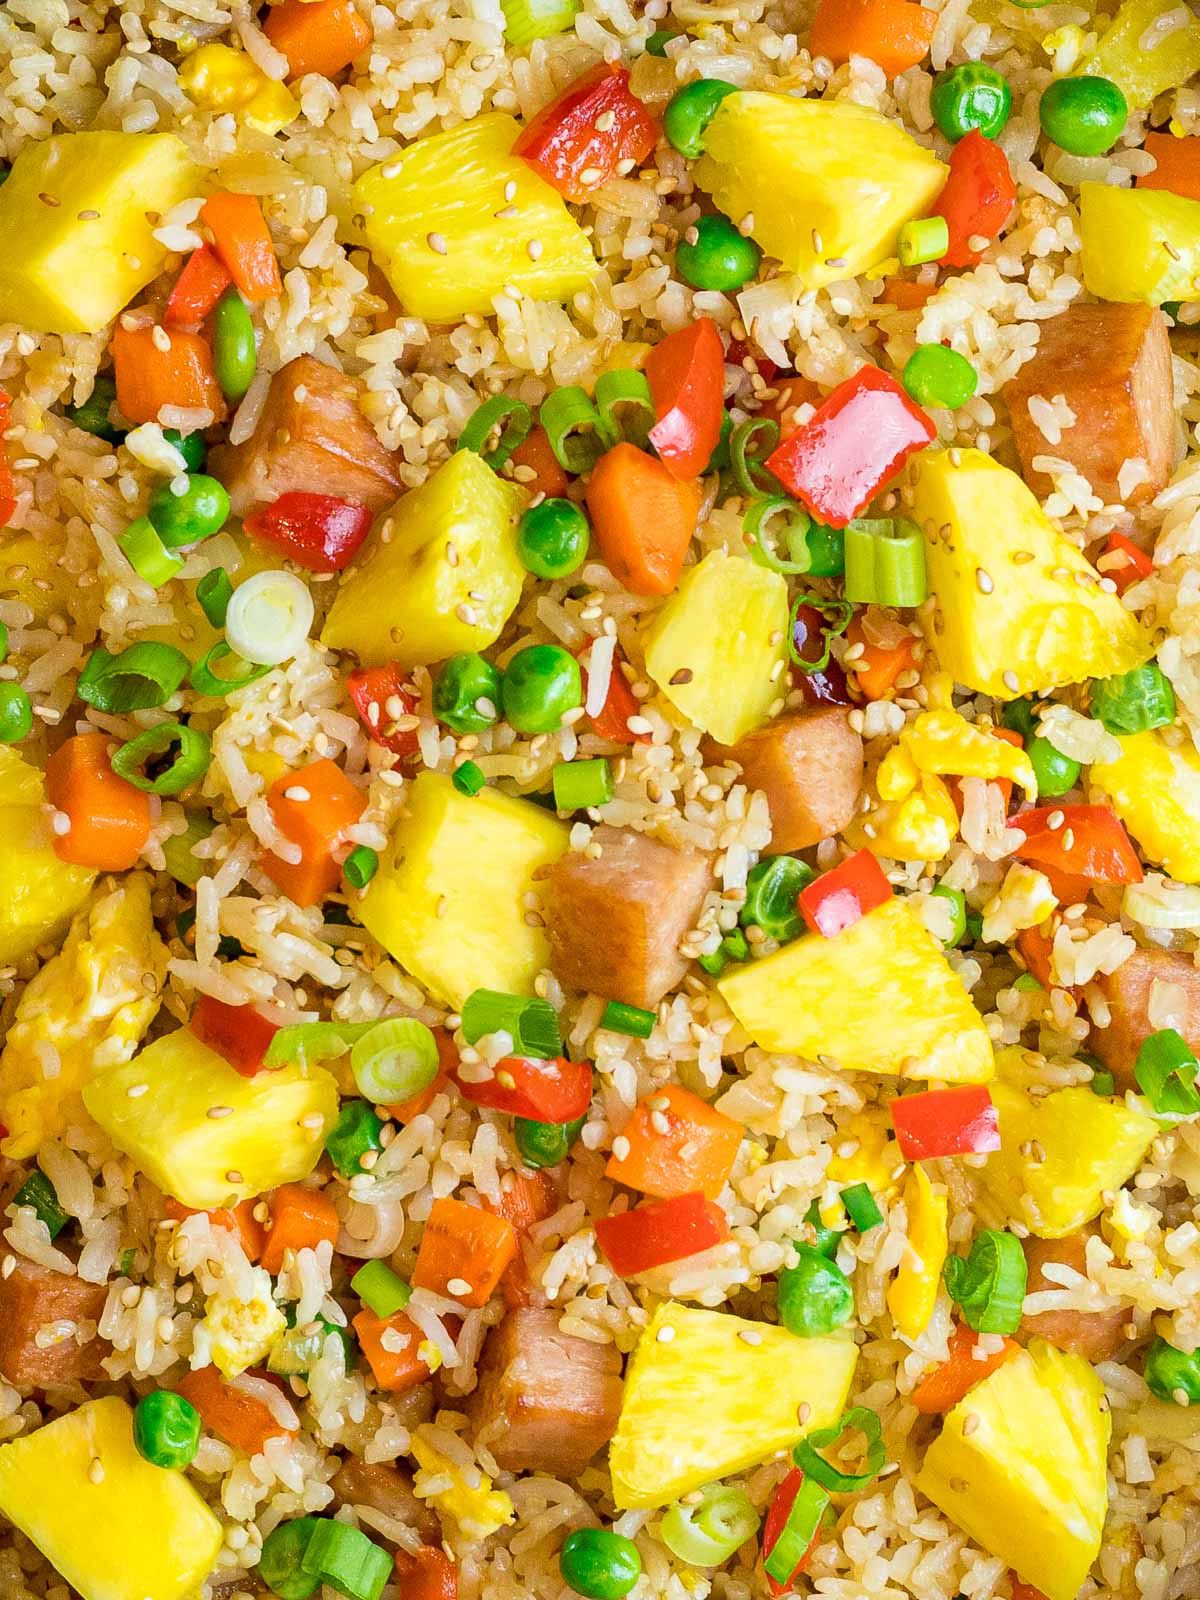 Hawaiian pineapple fried rice with pineapple chunks, red bell peppers, and peas